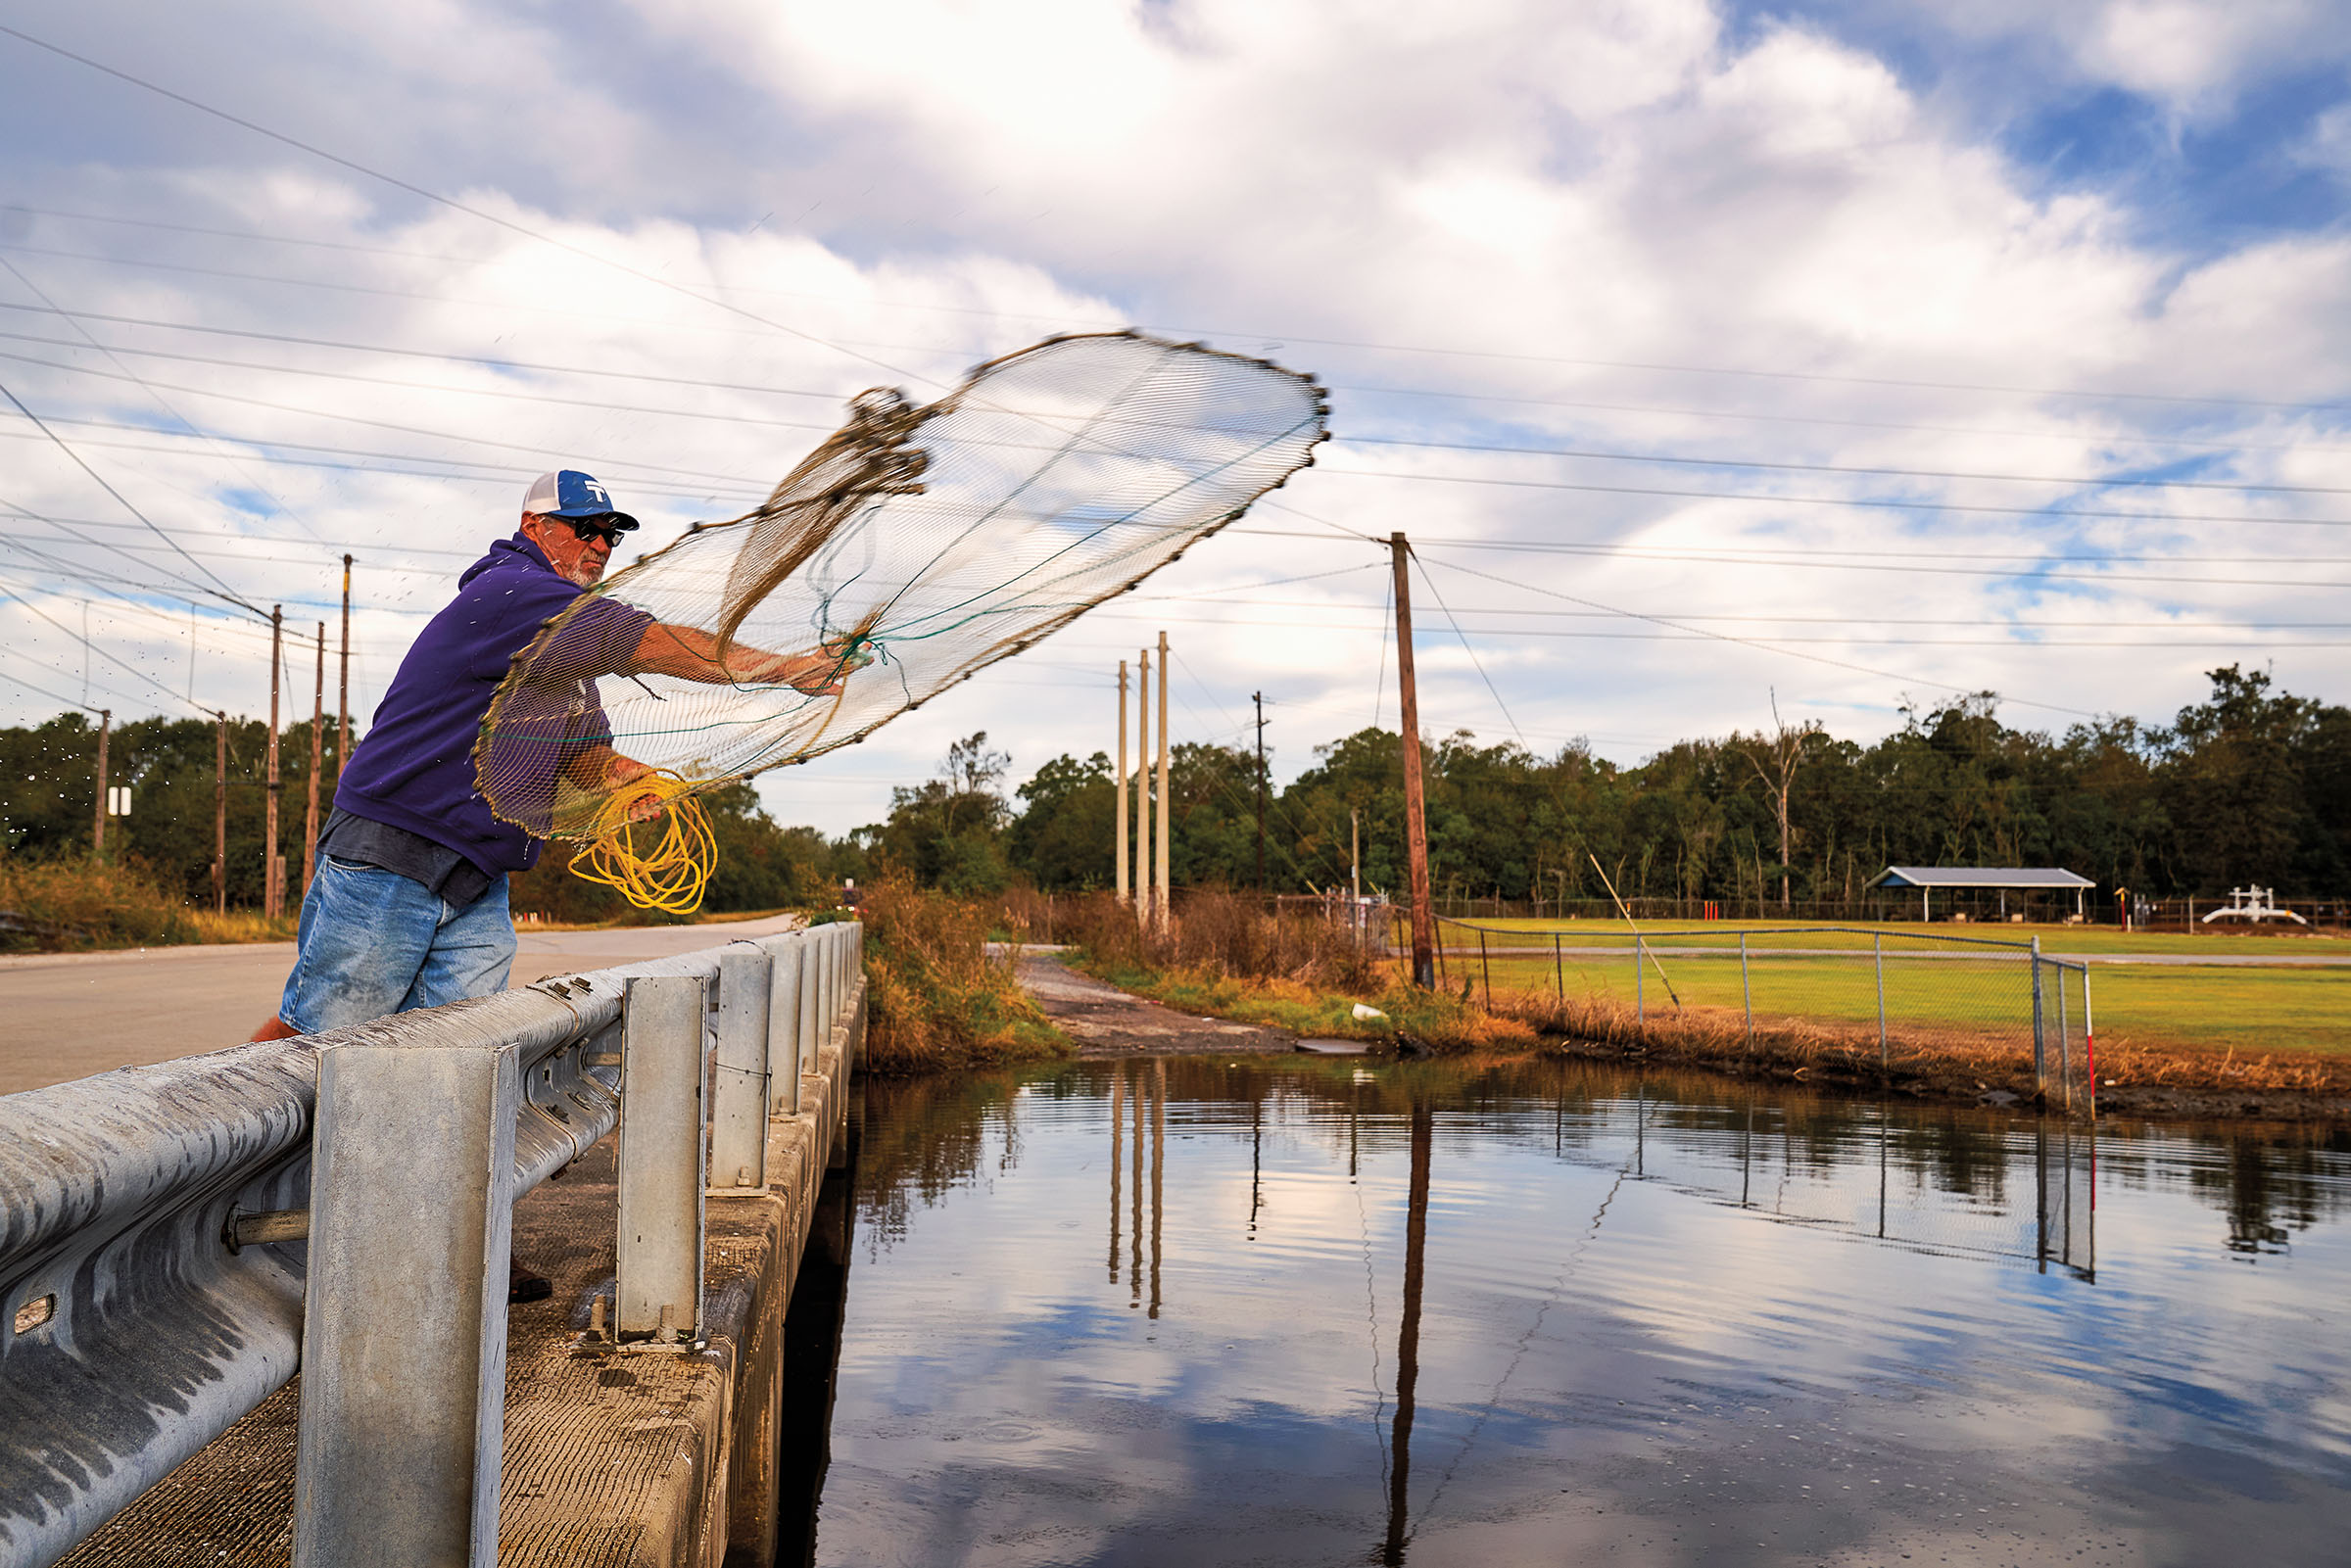 A man throws a large net over a body of water